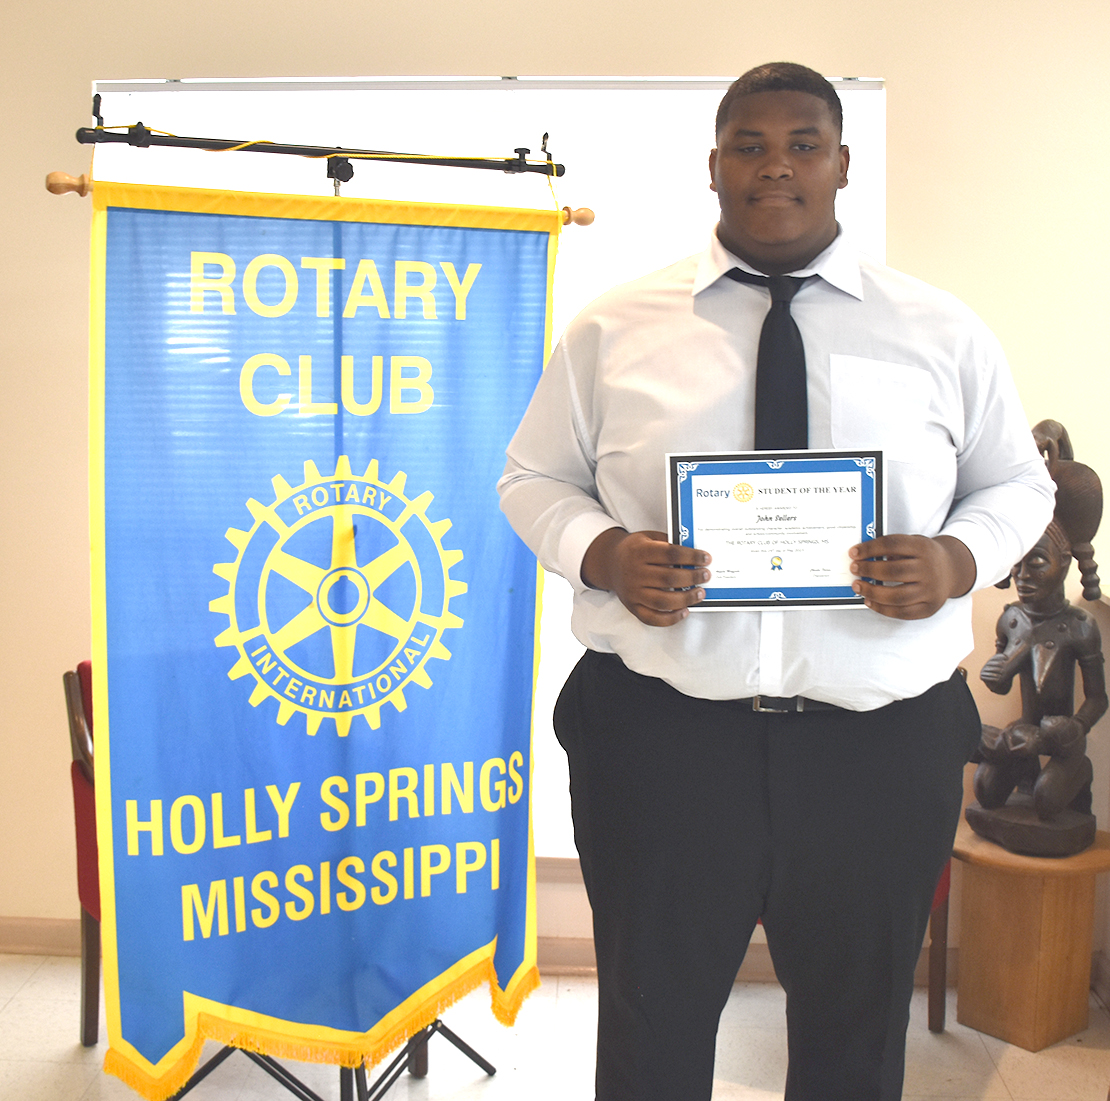 Rotary Club Students of the Year